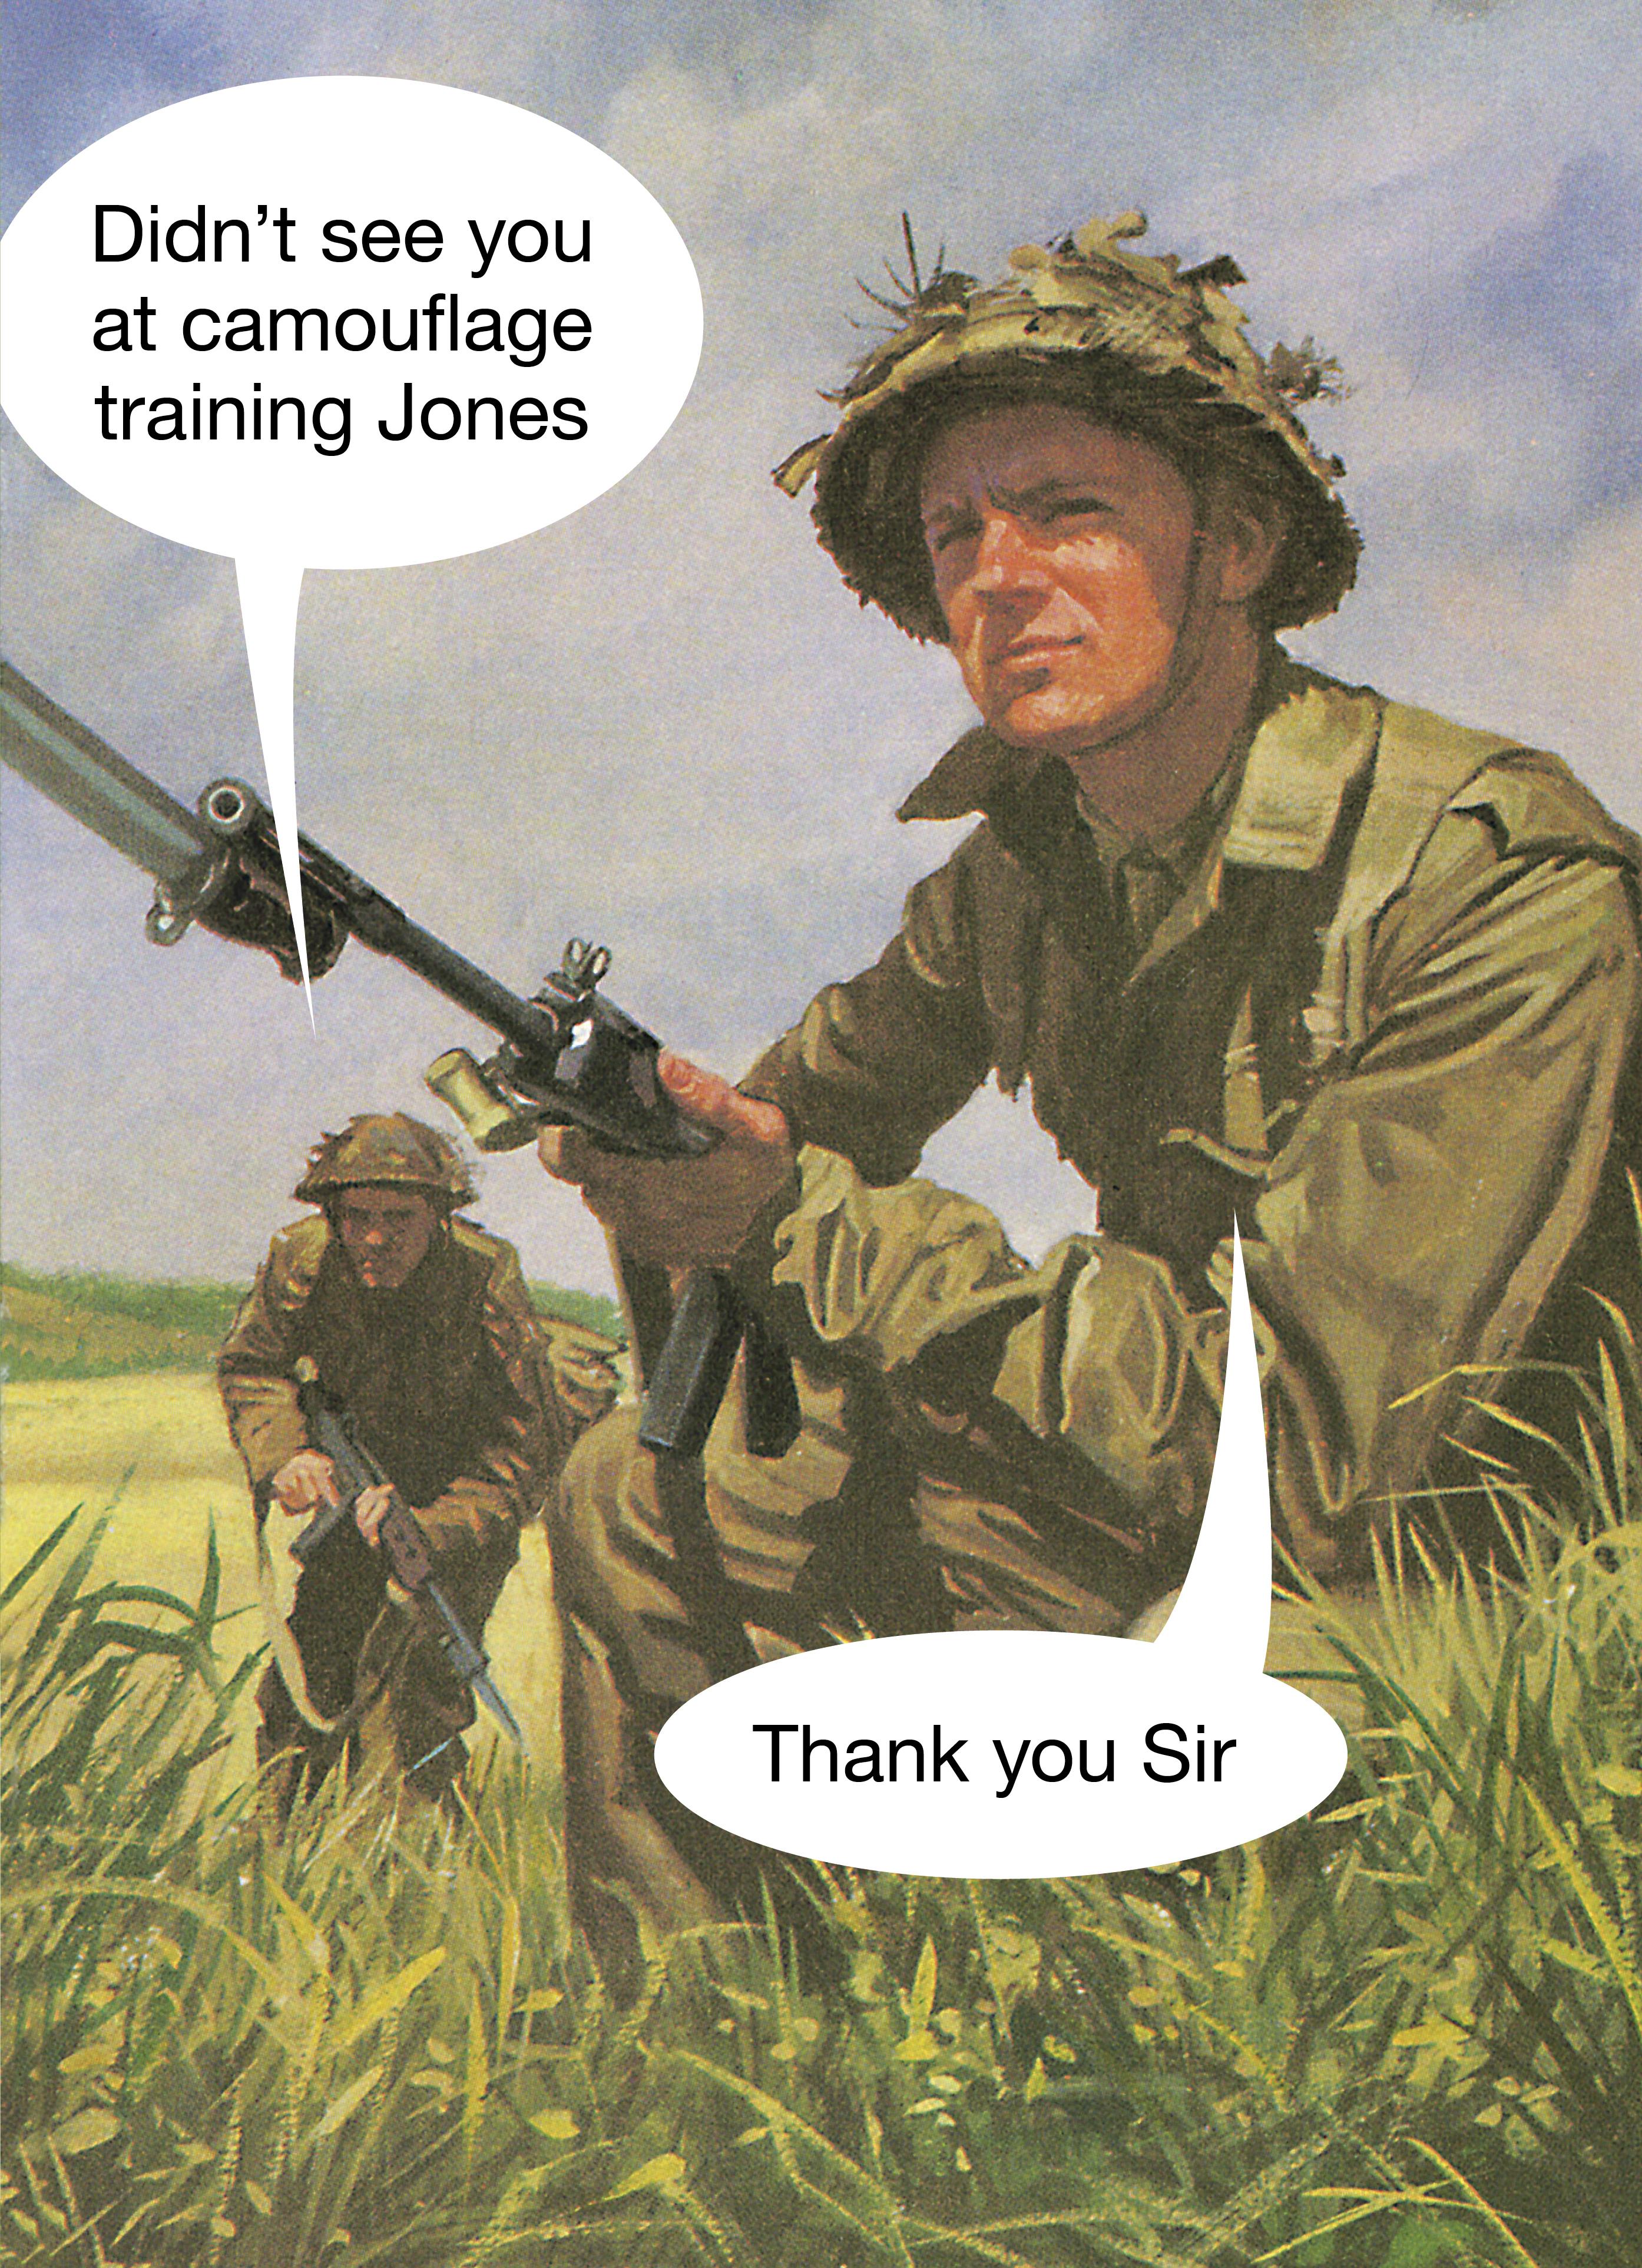 I didn't see you at camouflage training Jones. Thank you Sir